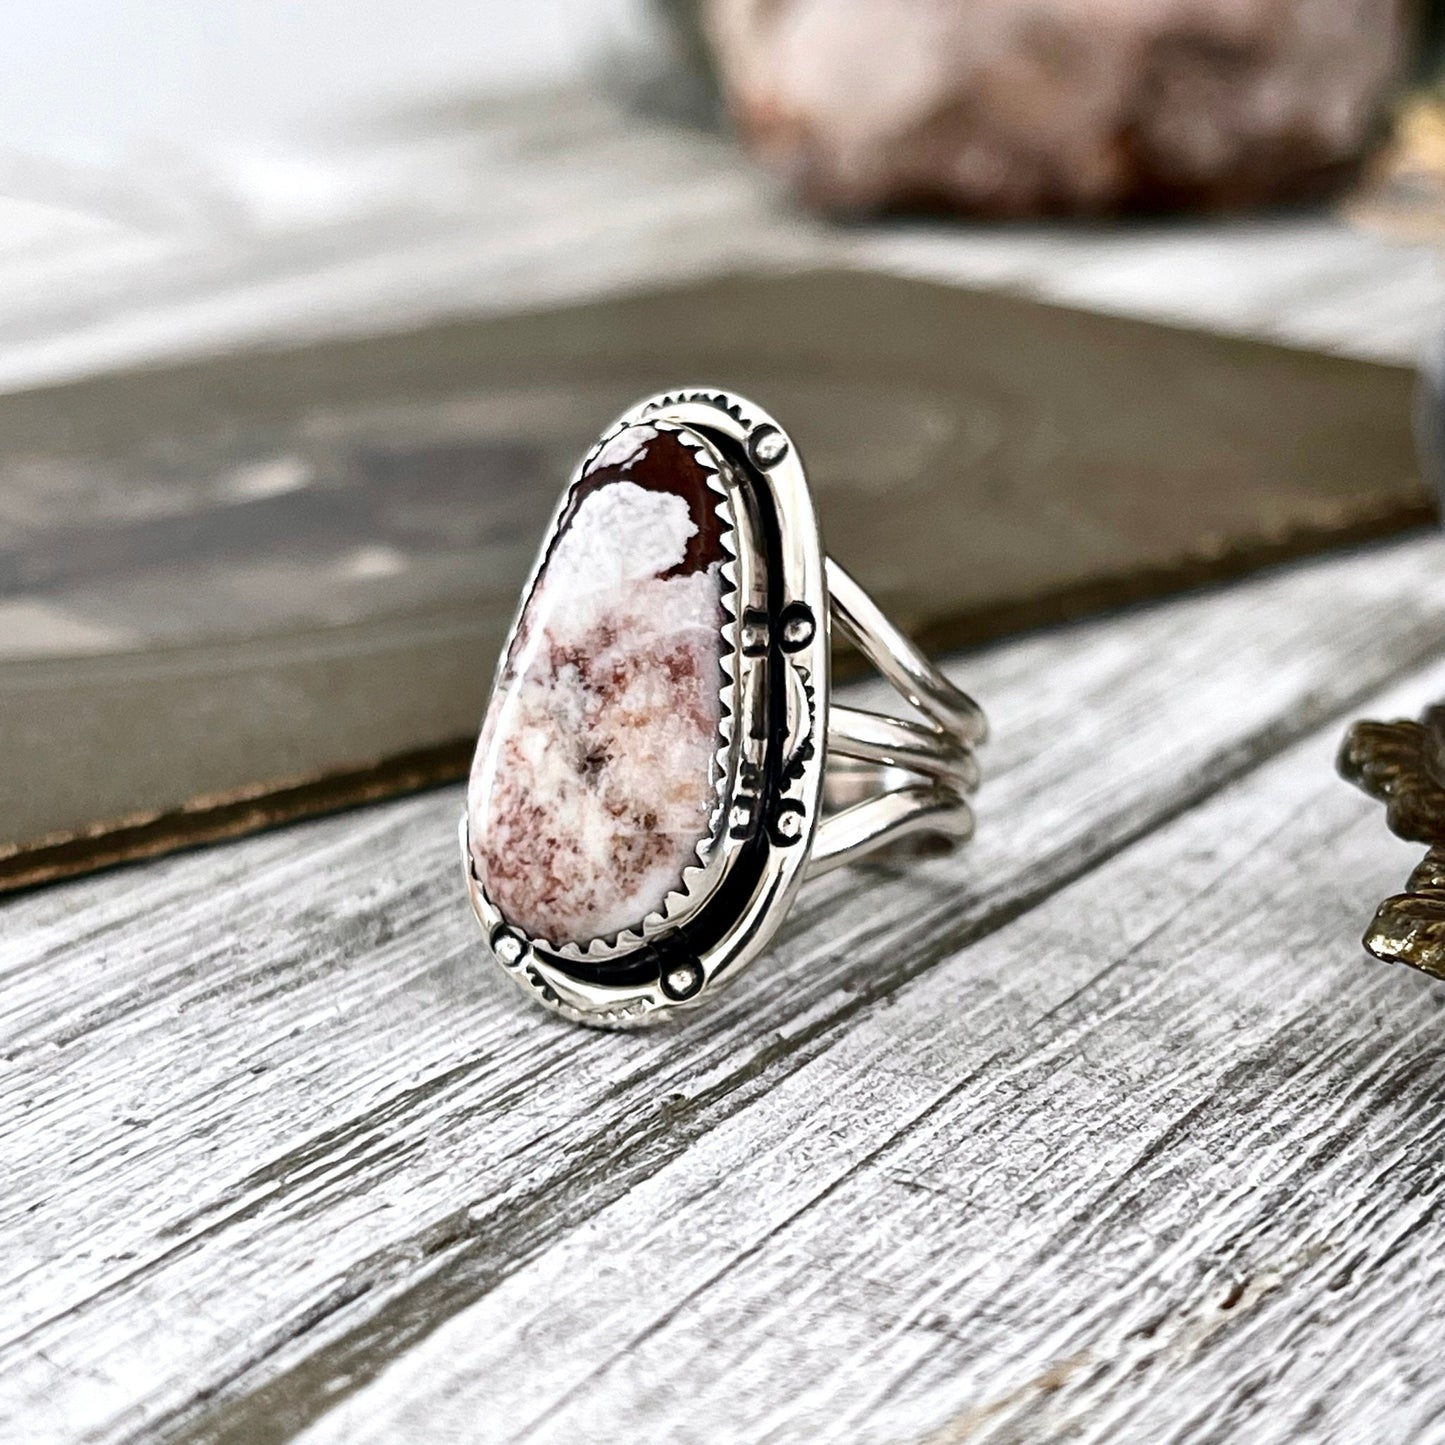 Size 8 Stunning Wild Horse Jasper Statement Ring Set in Sterling Silver Size 8 / Curated by FOXLARK Collection